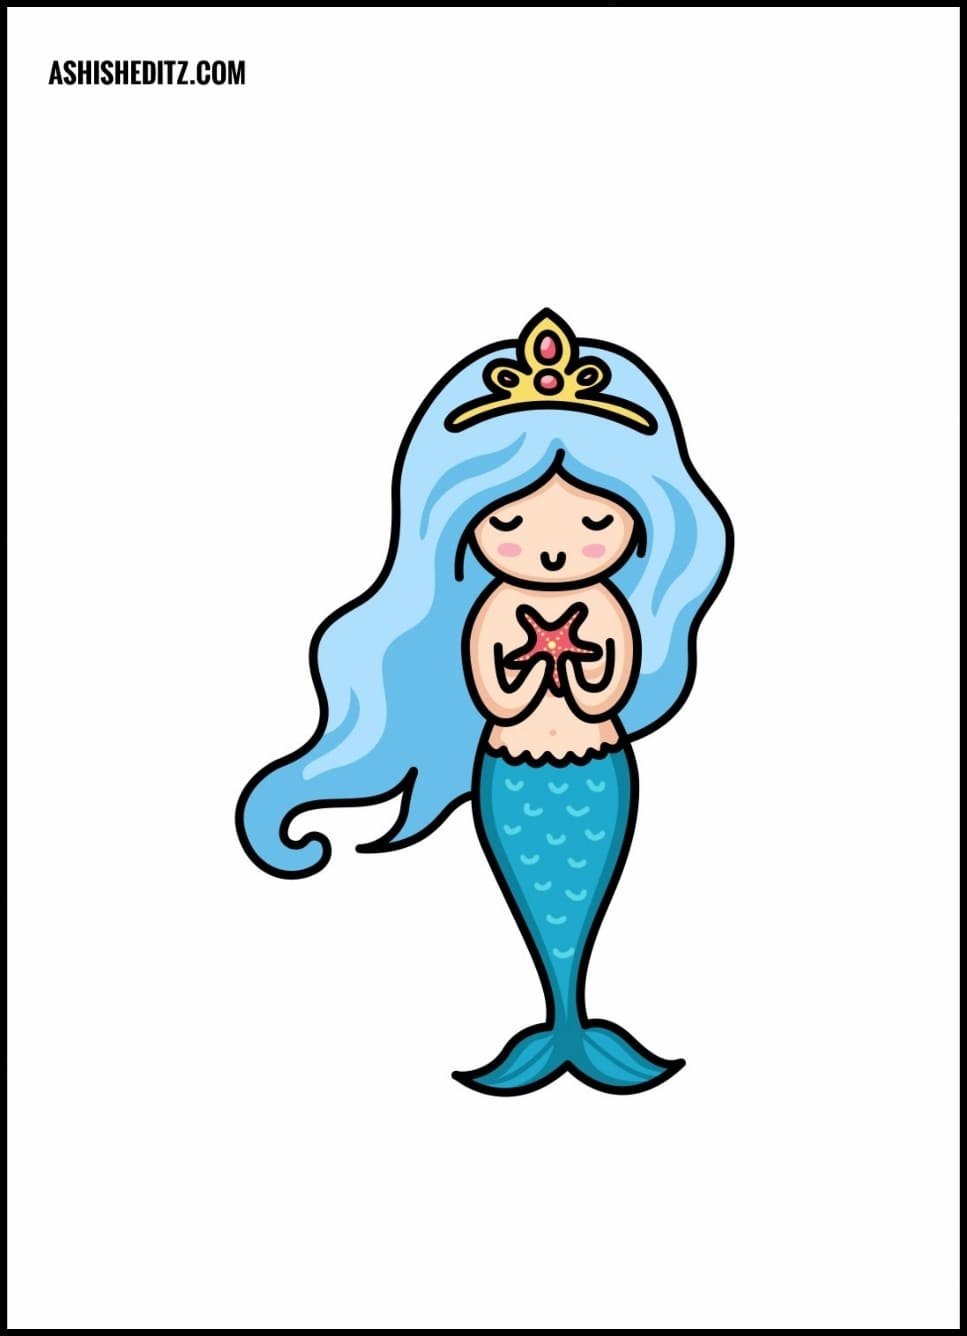 How To Draw a Mermaid Easy Printable Lesson For Kids | Kids Activities Blog